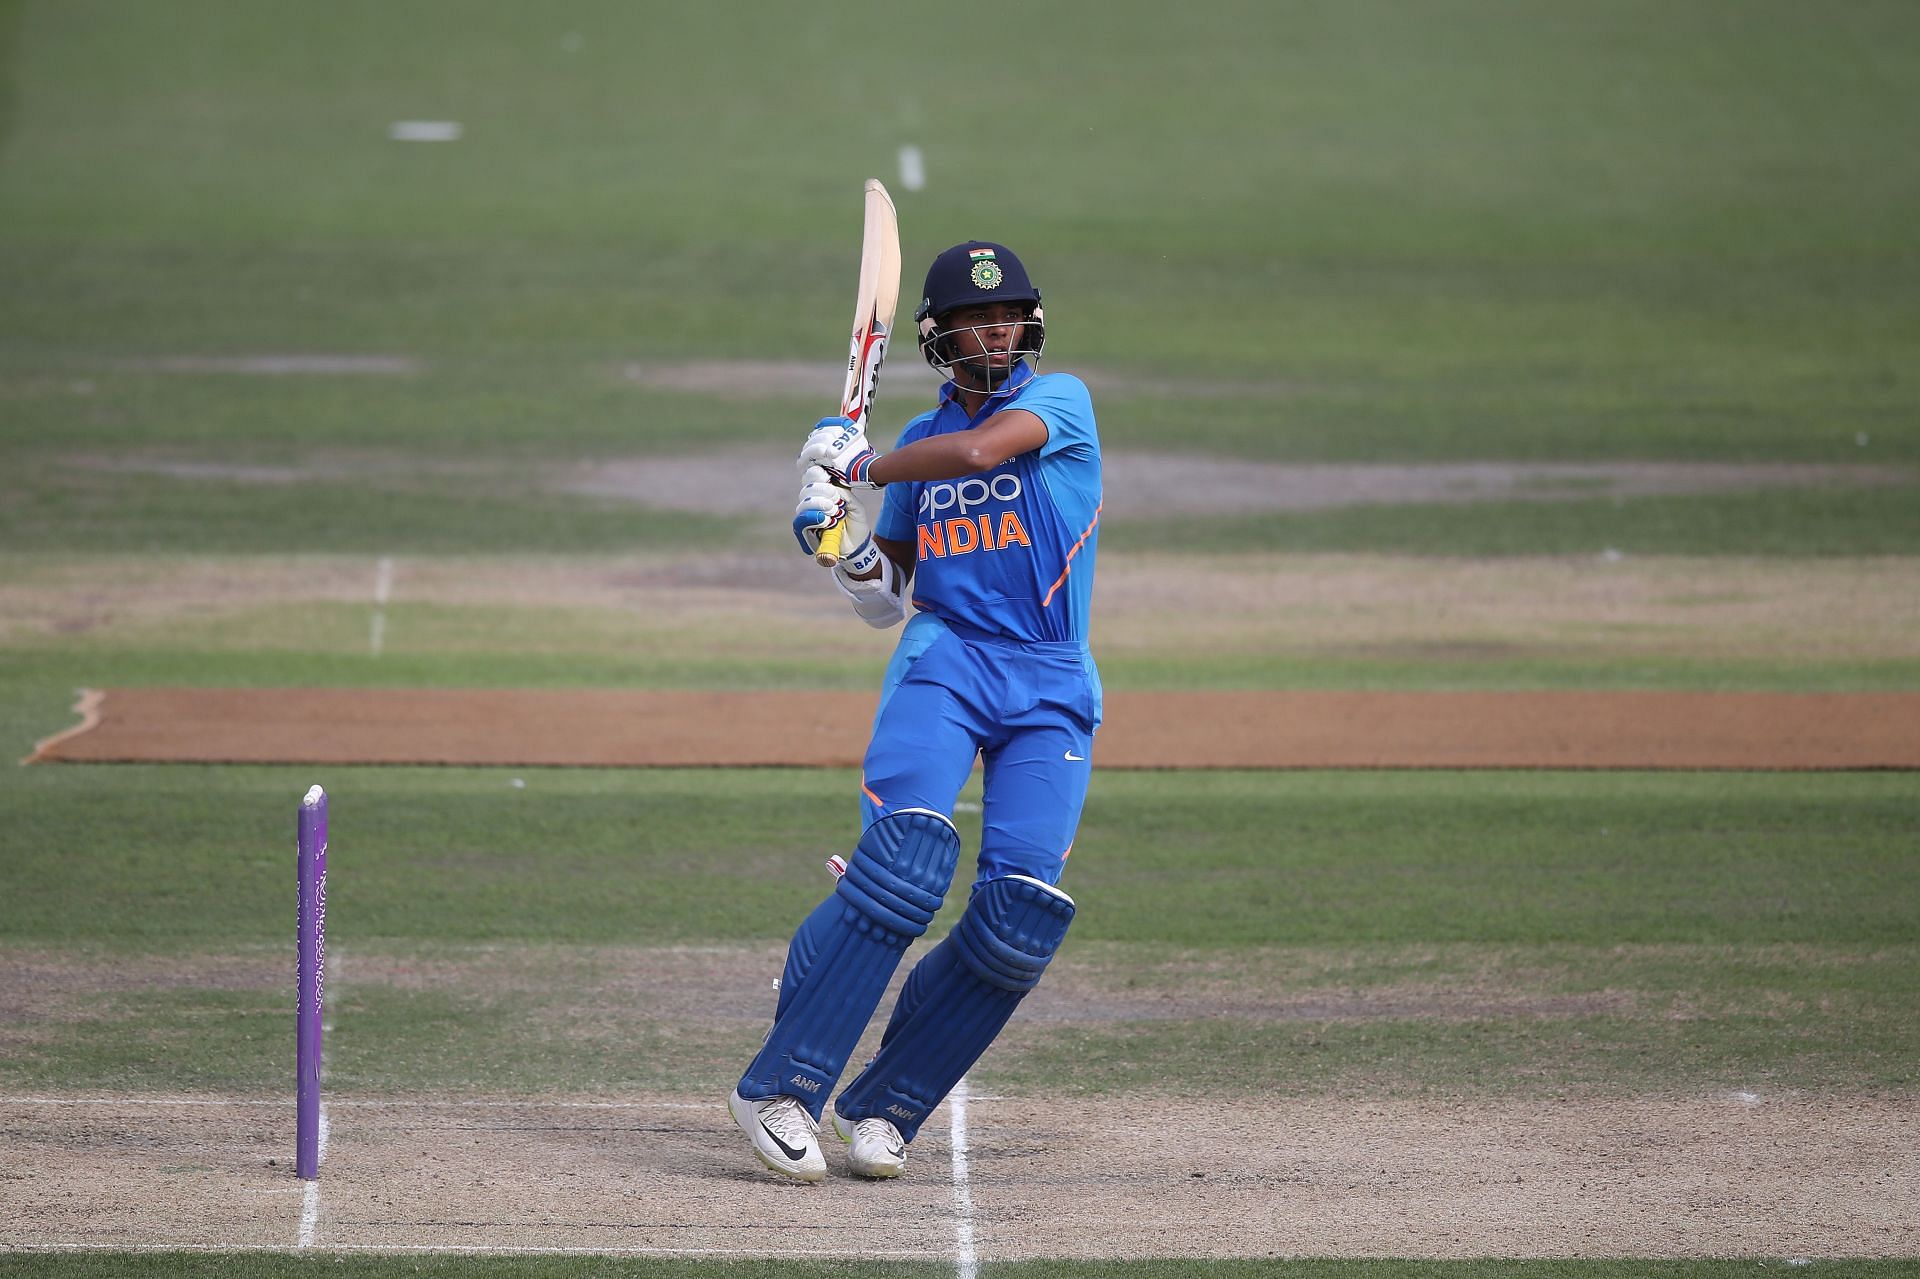 Yashasvi Jaiswal could be the perfect replacement for Rohit Sharma as a test opener.